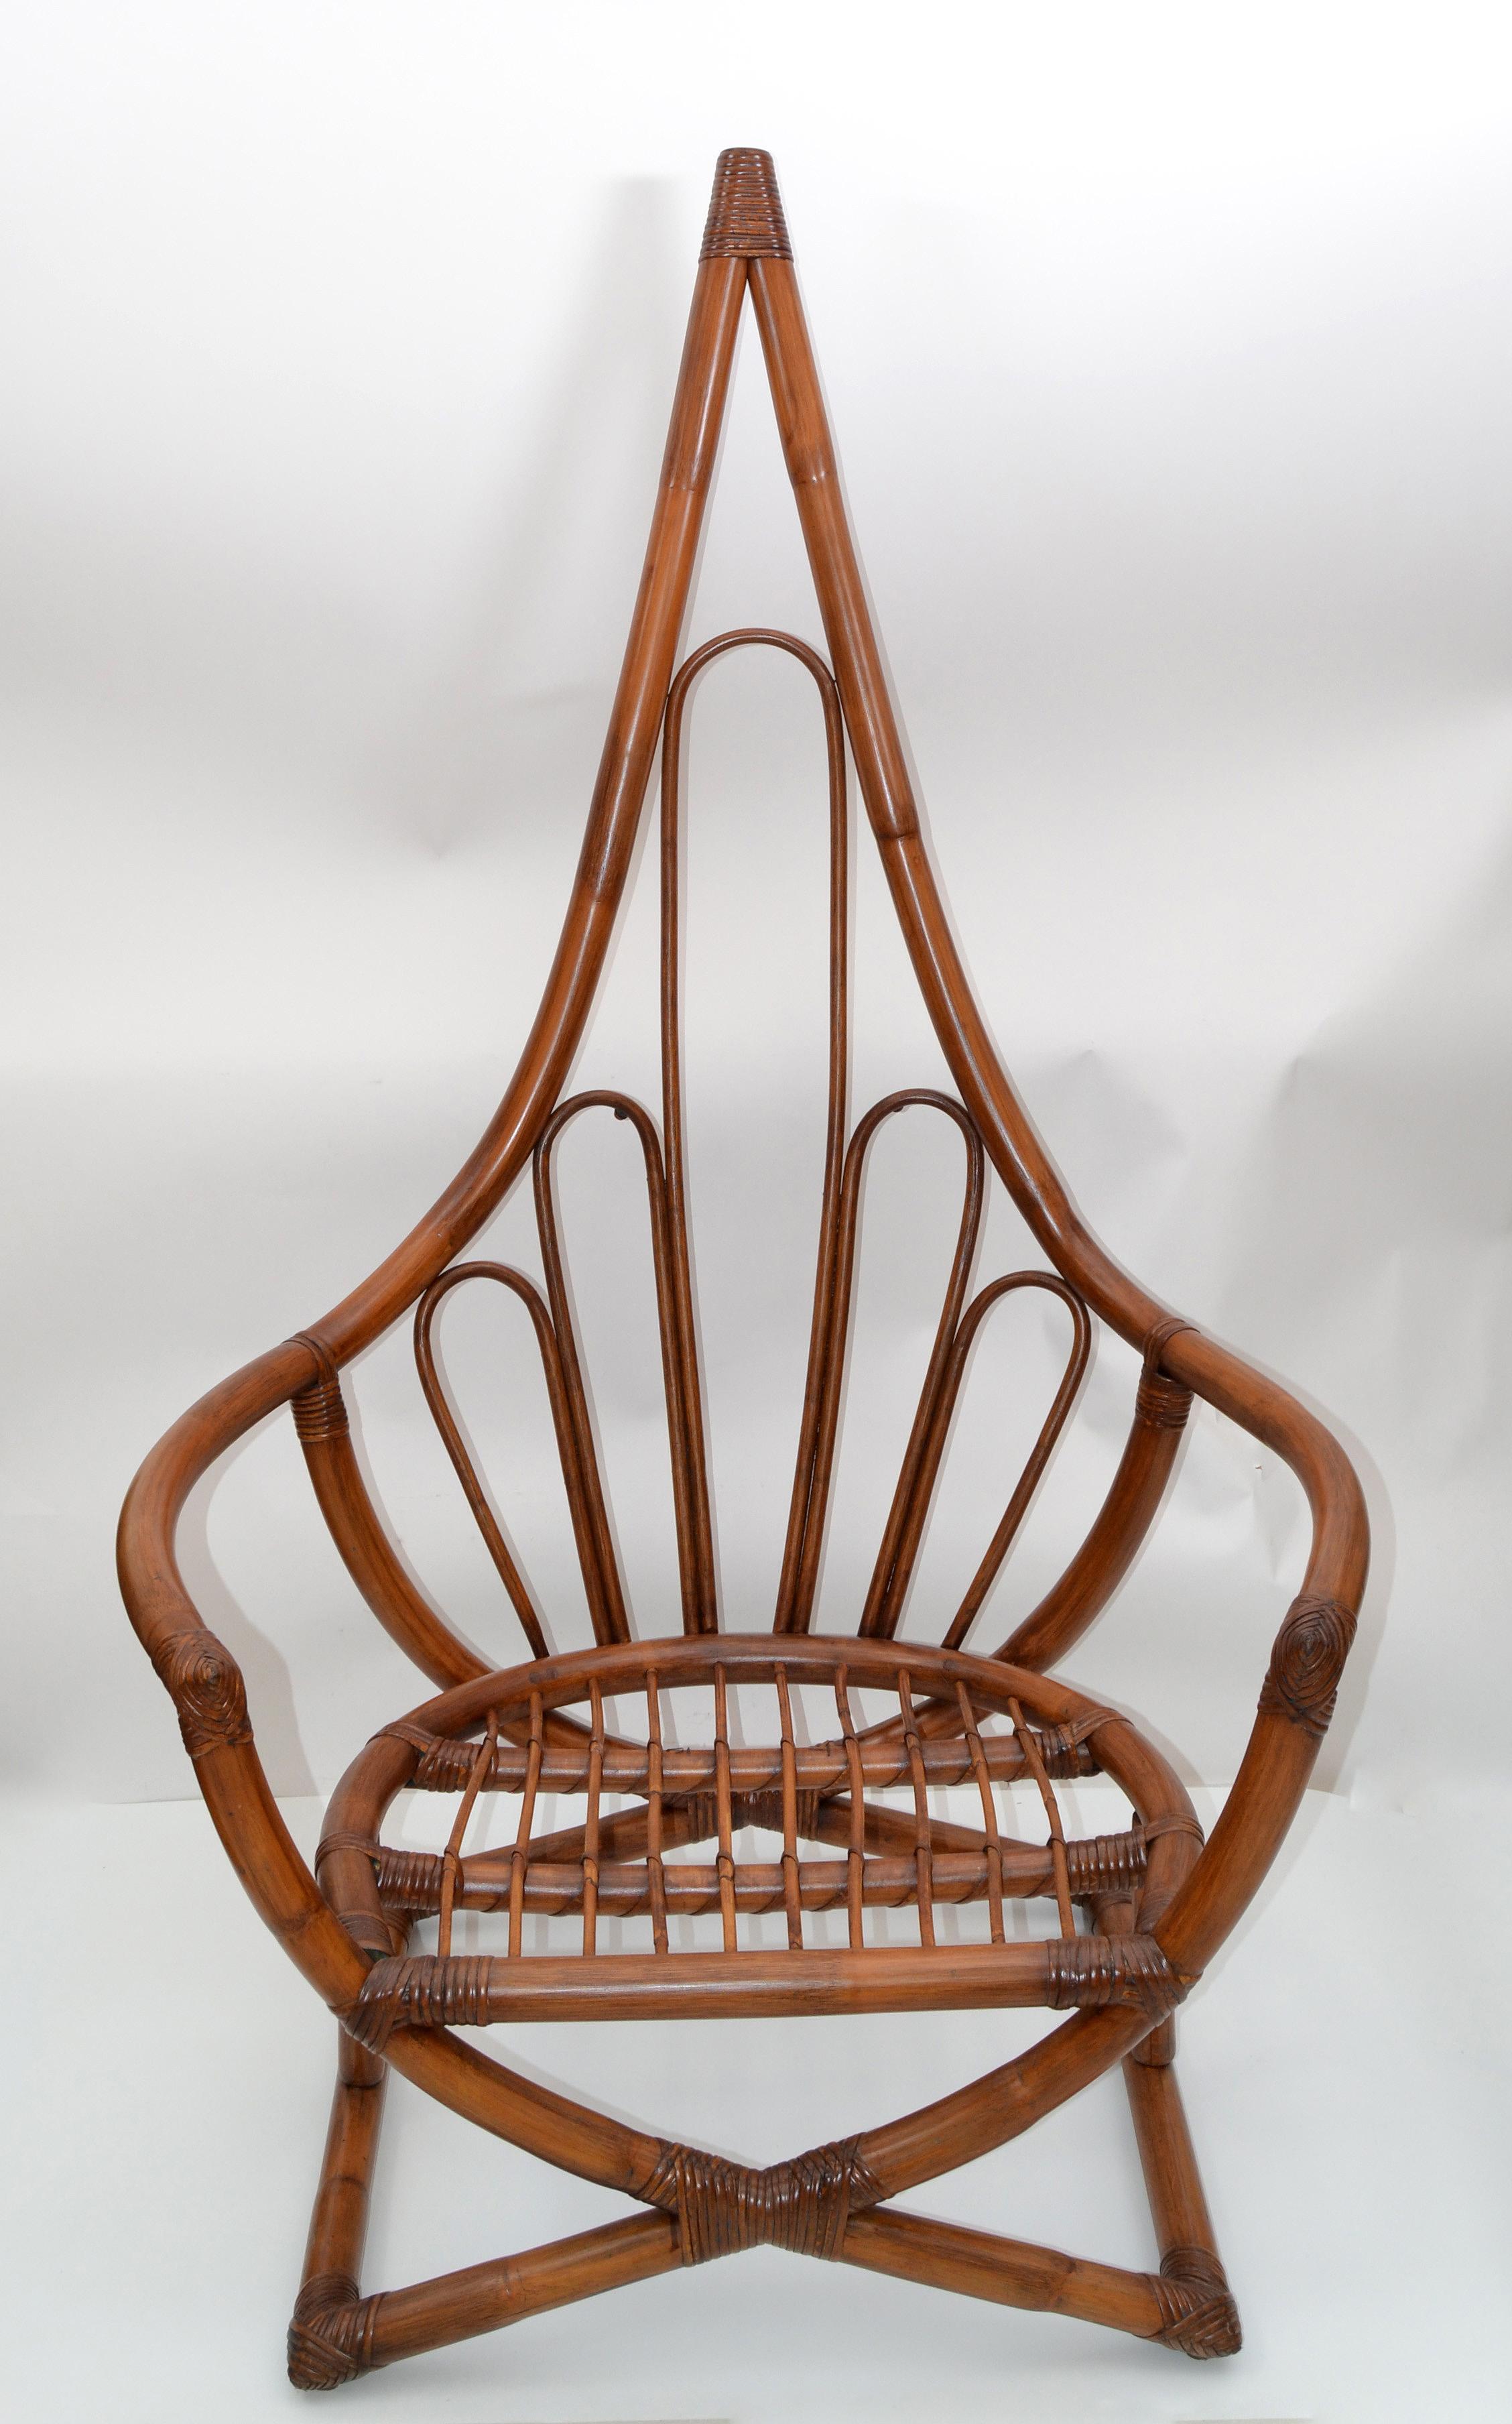 Vintage Franco Albini & Franca Helg style handwoven bamboo, wicker Peacock wingback chair.
Exemplary construction, woven ties are firmly linked.
An iconic design Classic made in Italy.
Arm Height: 21.75 inches.